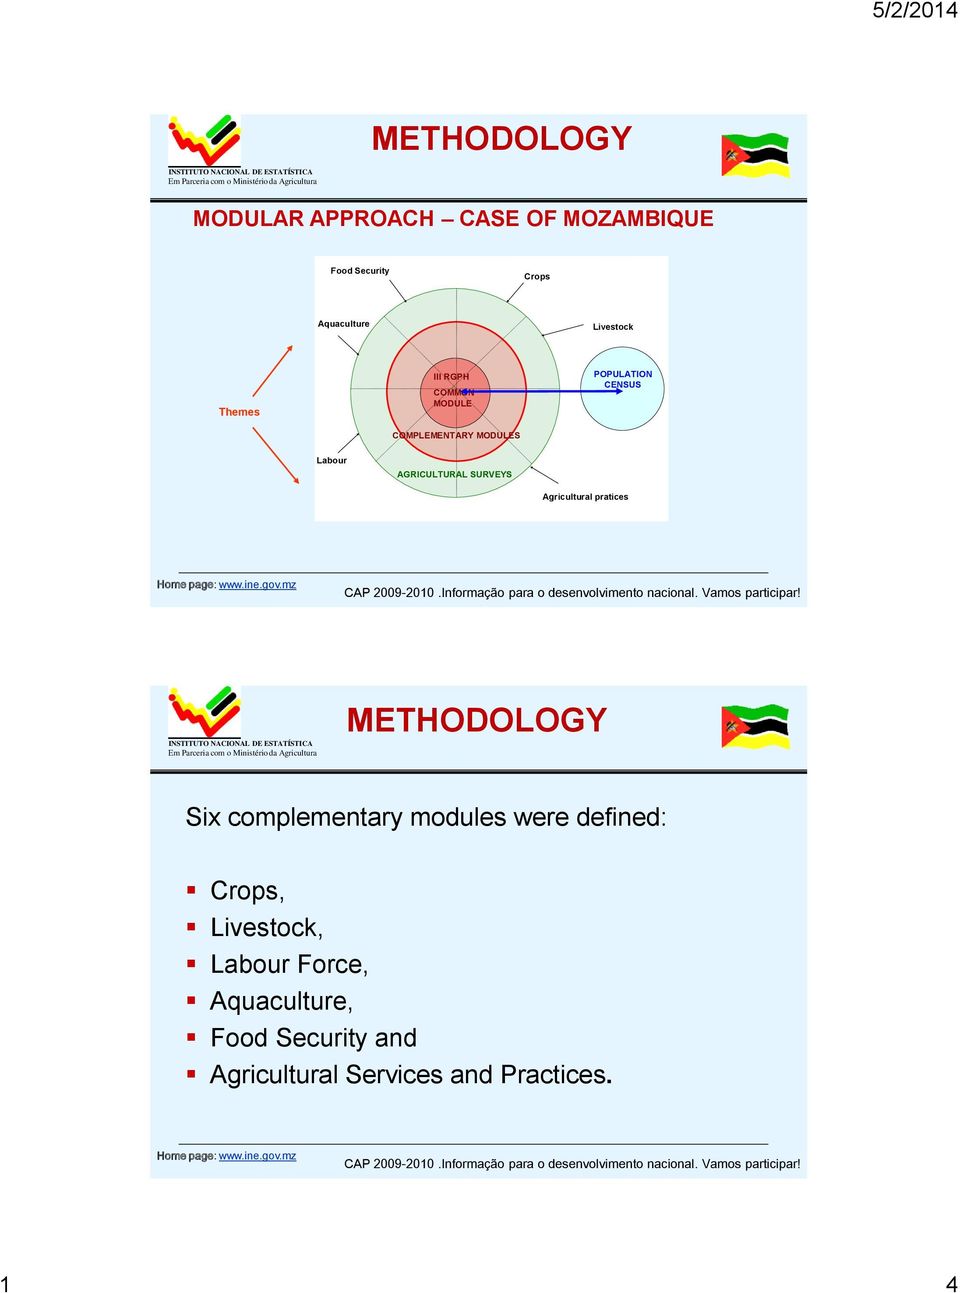 SURVEYS Agricultural pratices METHODOLOGY Six complementary modules were defined: Crops,